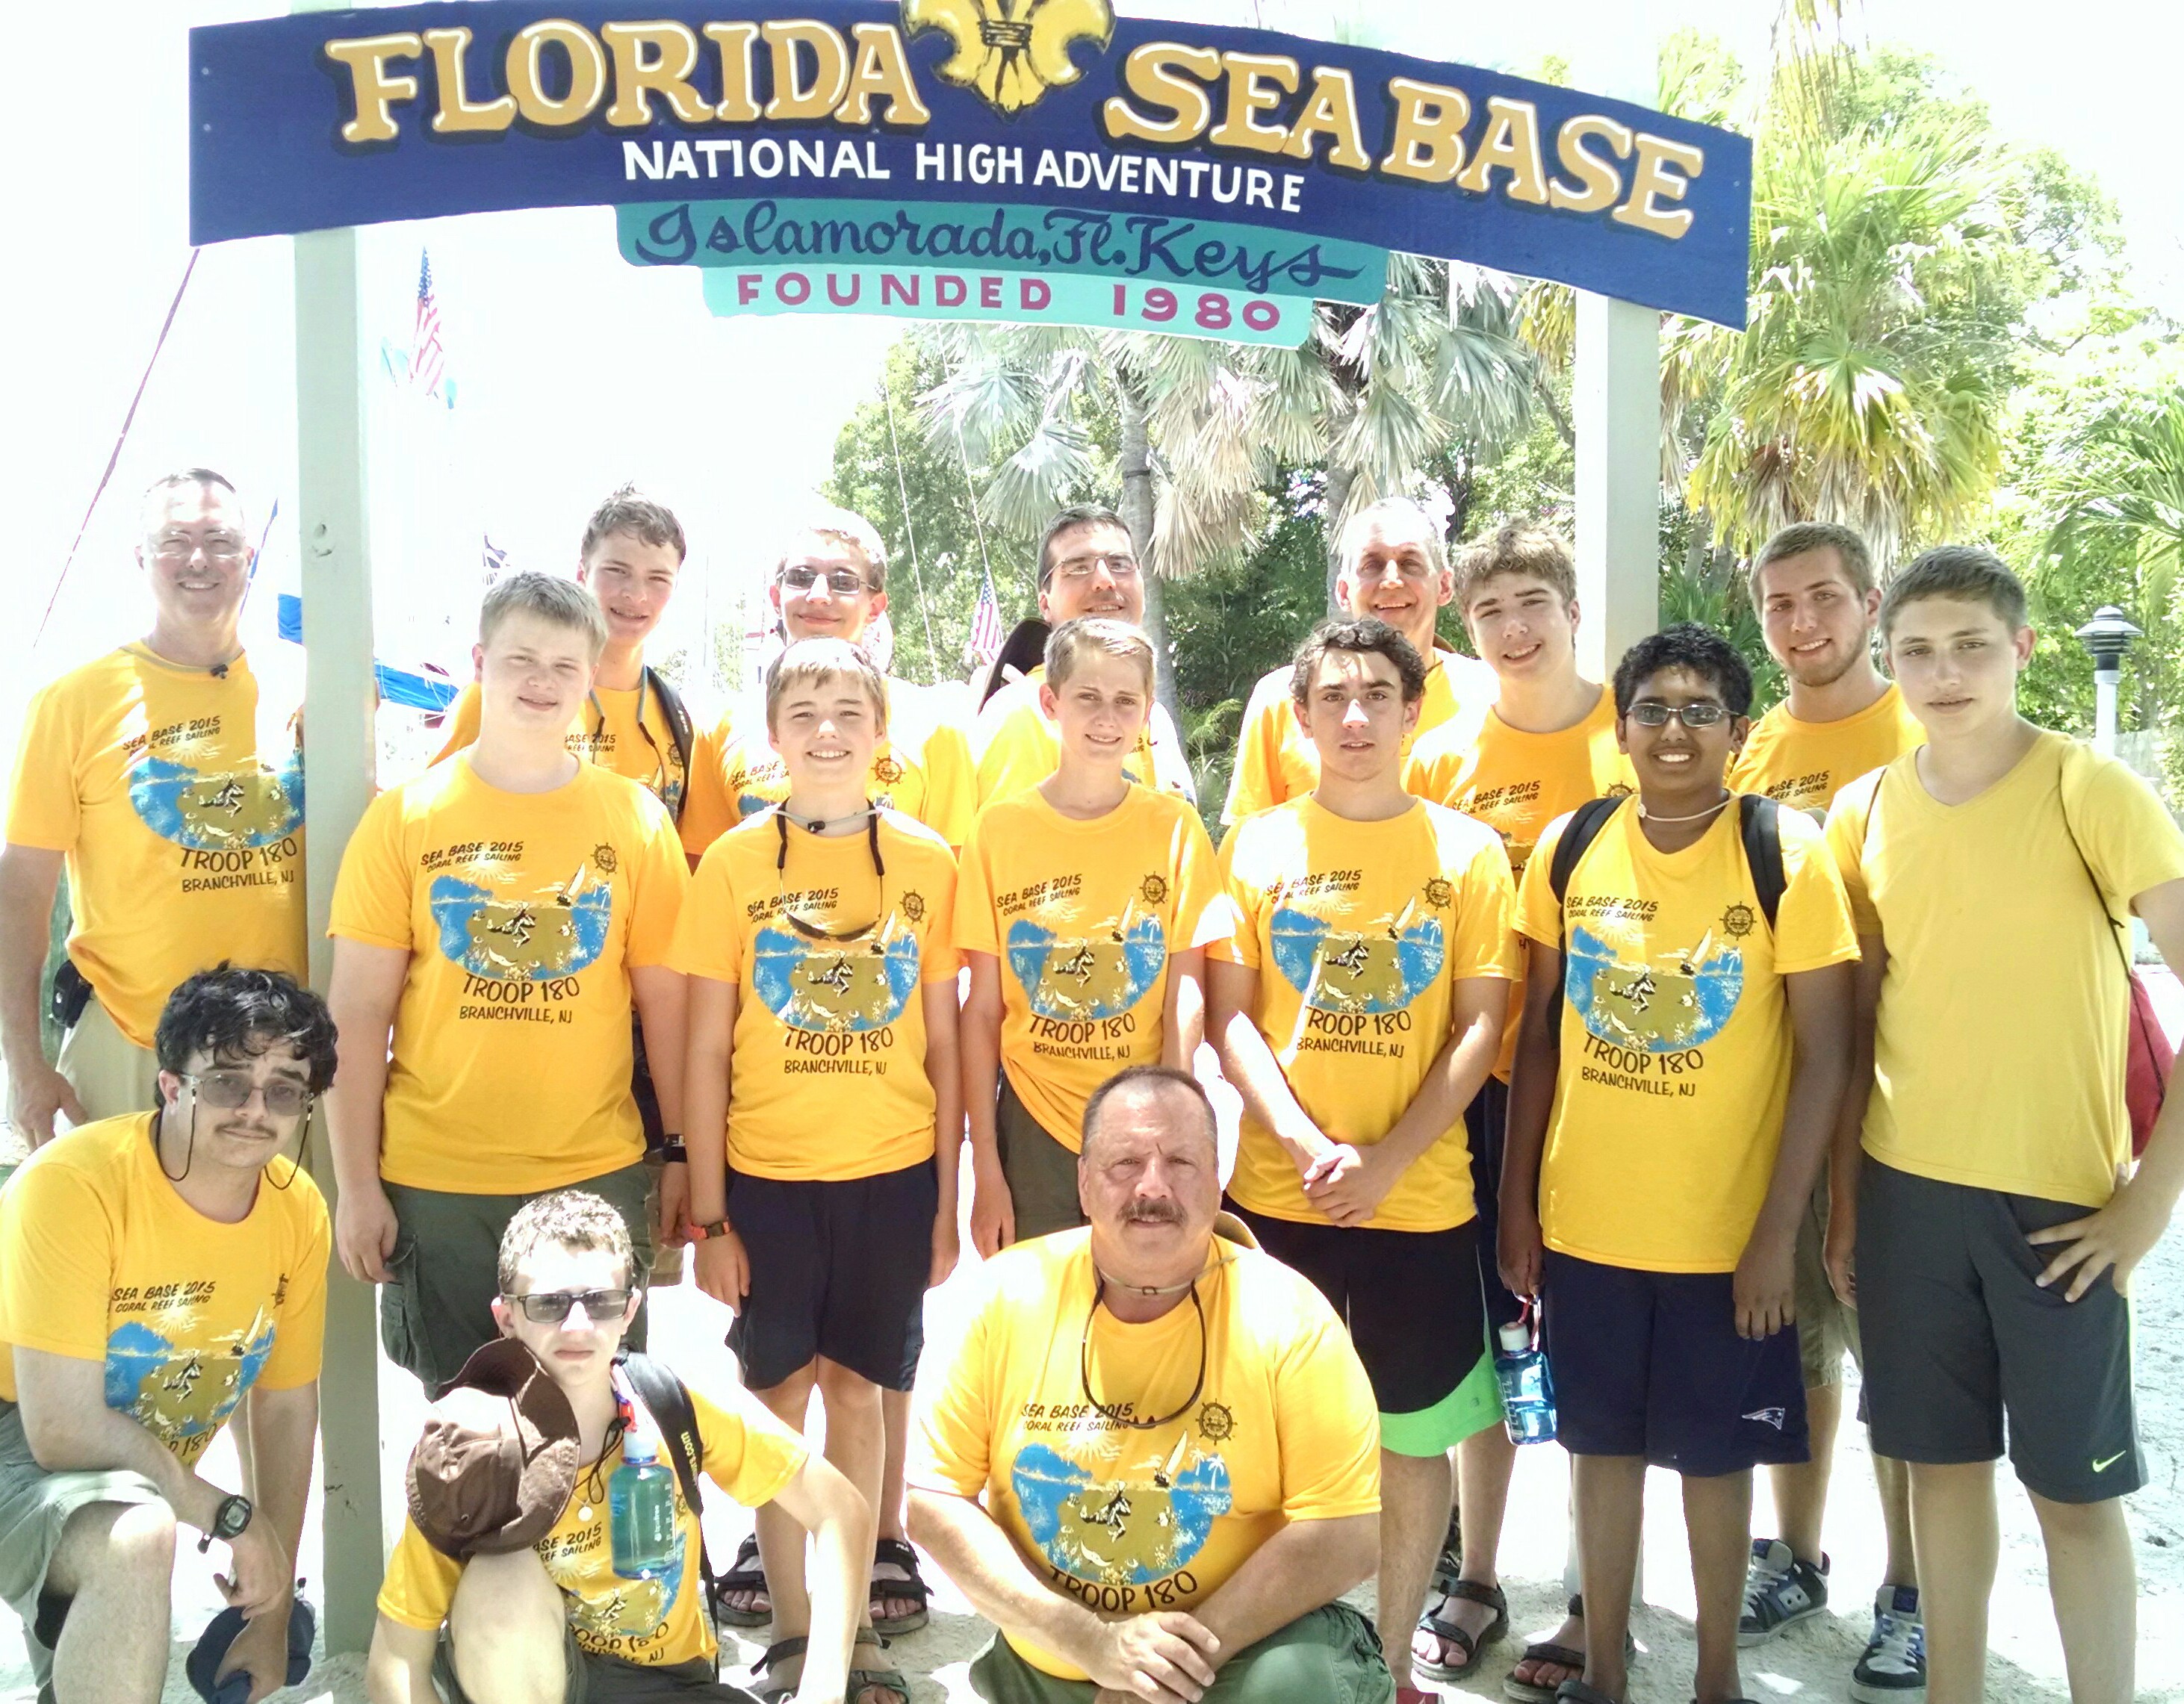 Troop 180 is shown wearing their gold Classic Fit Performance T-Shirts from Class B in front of the Florida Sea Base Camp